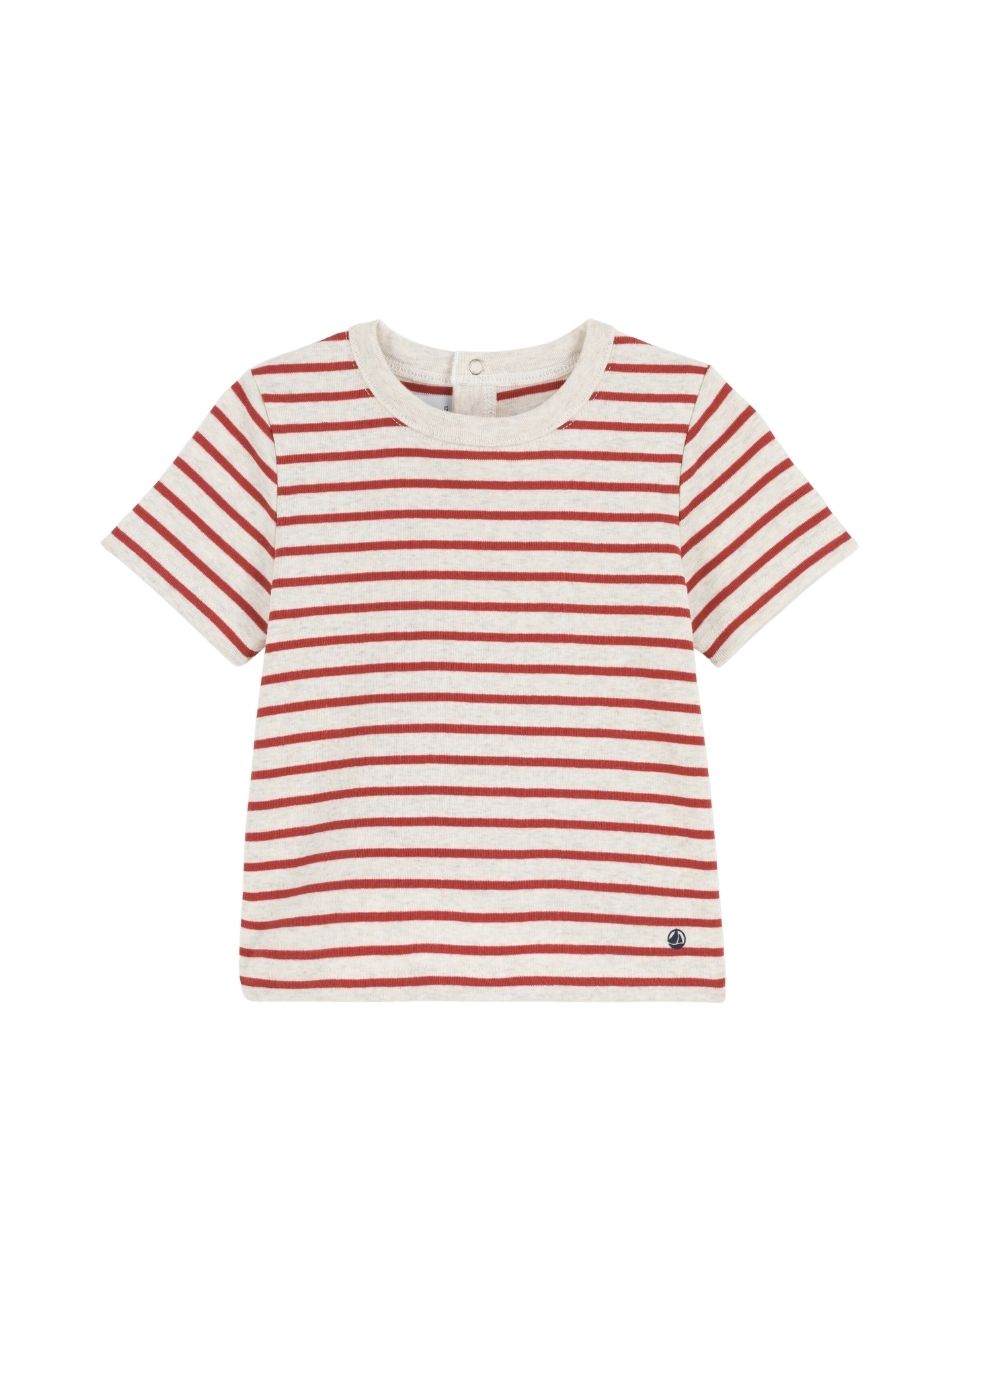 Featured image for “Petit Bateau T-shirt a costine”